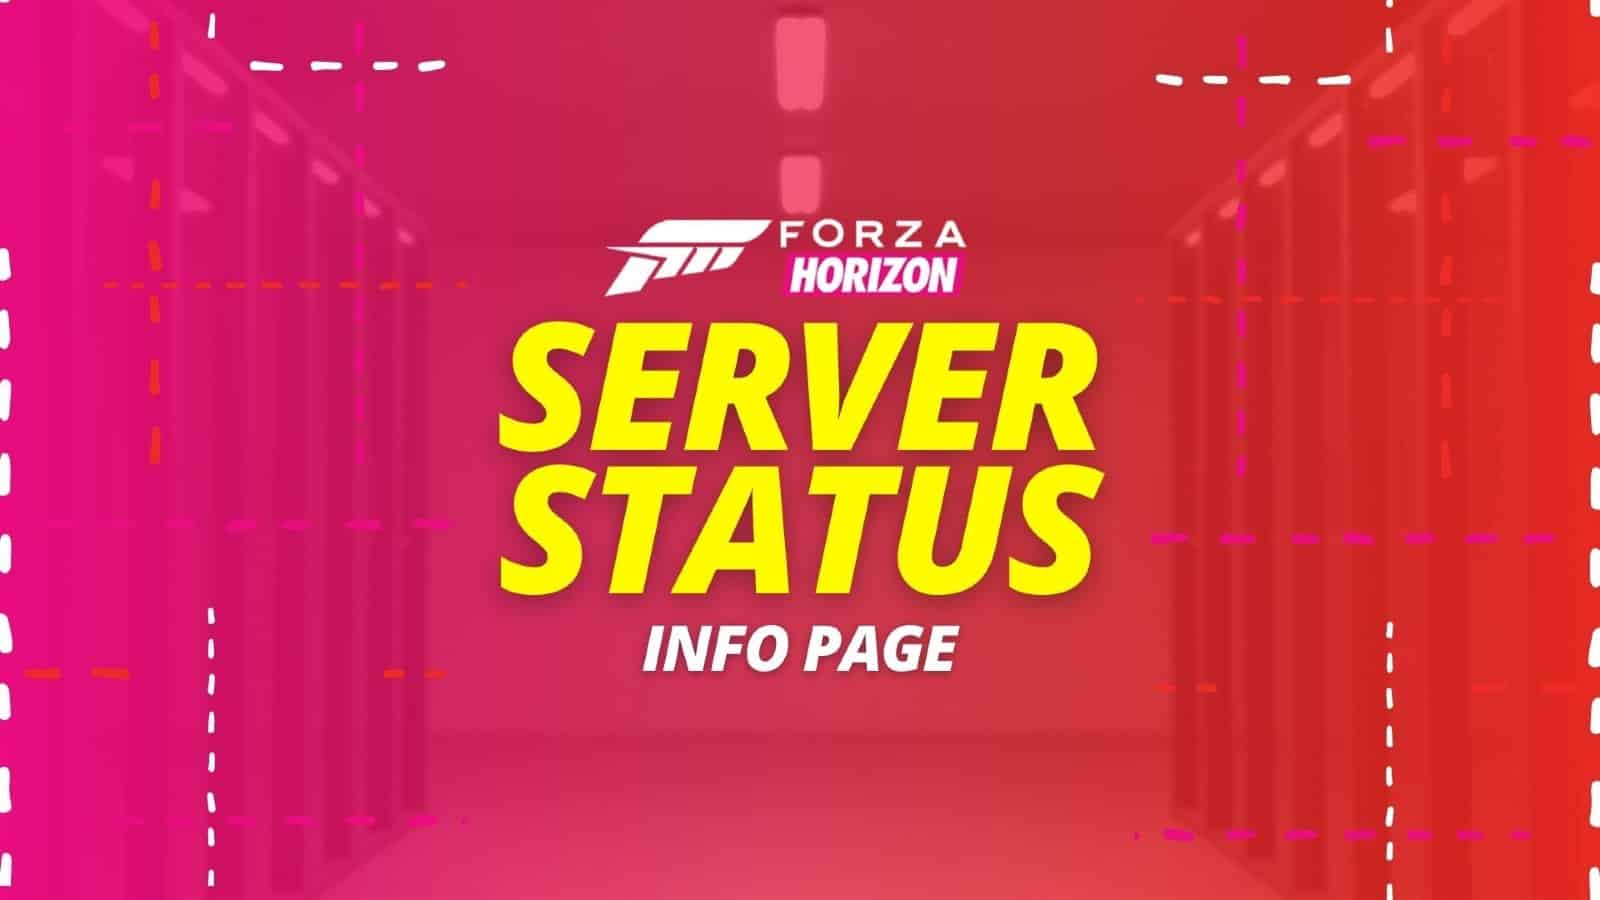 Forza Horizon 5 server status graphic made using the game's color palette